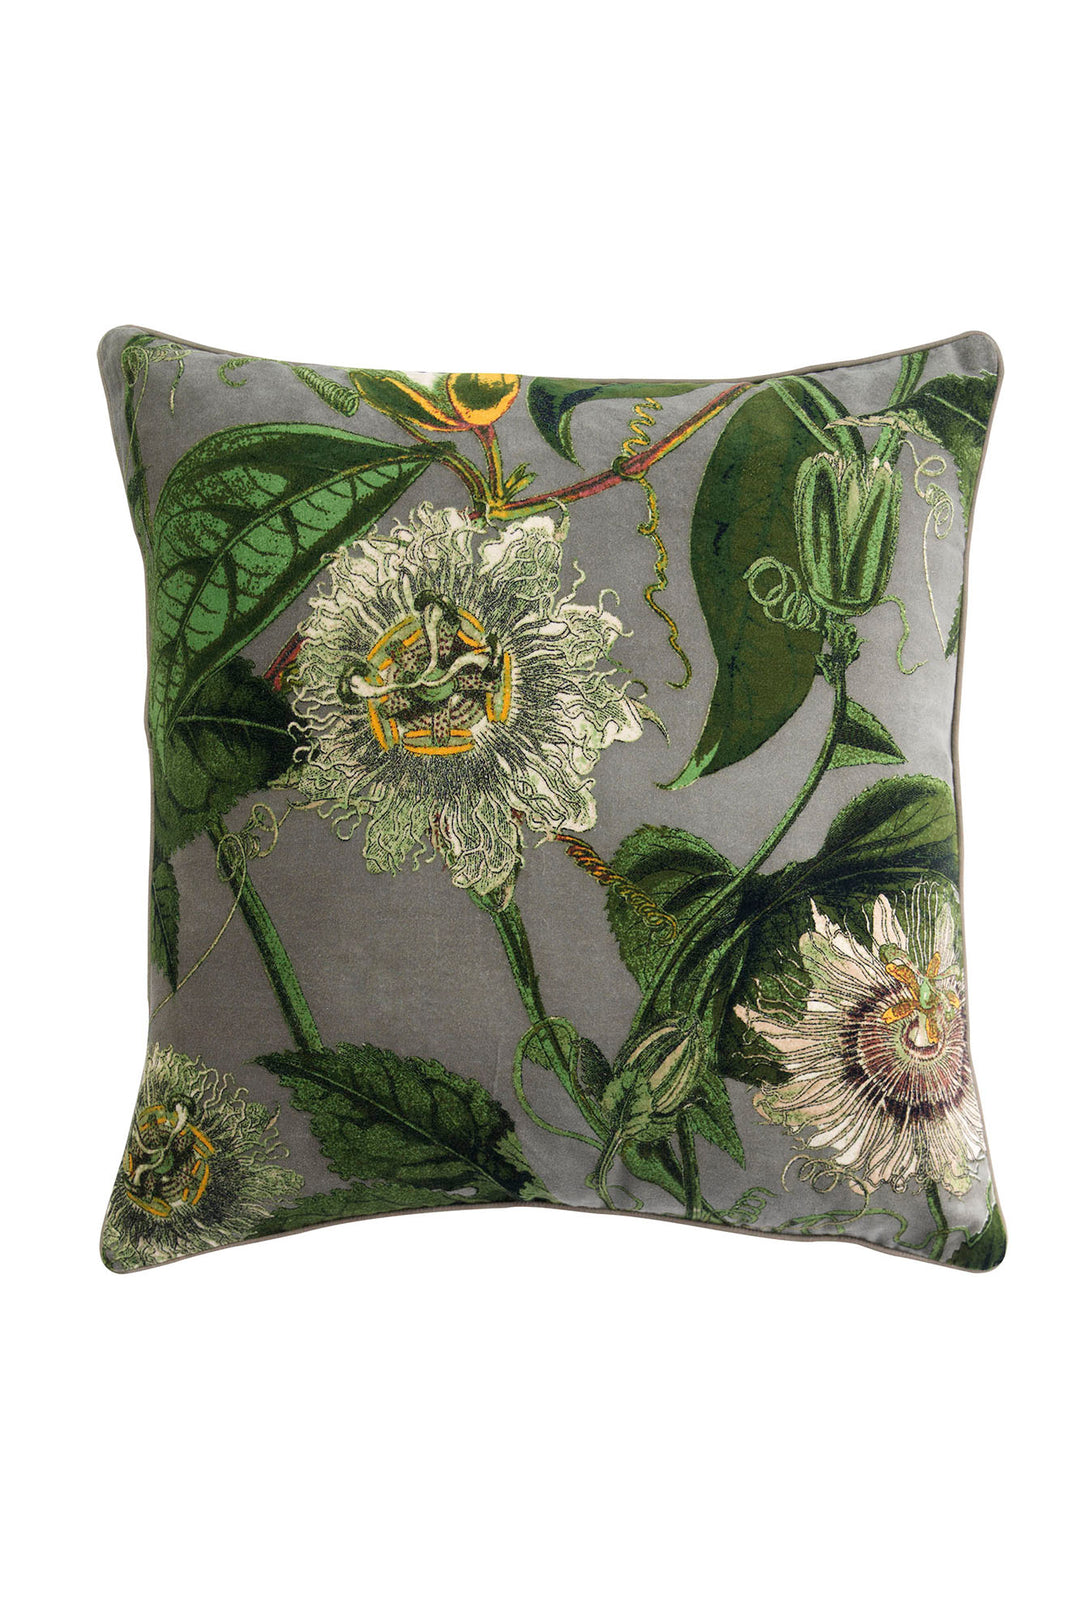 KEW Passion Flower Stone Velvet Square Cushion- These limited edition velvet cushions are 50 x 50cm and can purchased with or without an ethically sourced duck feather inner.